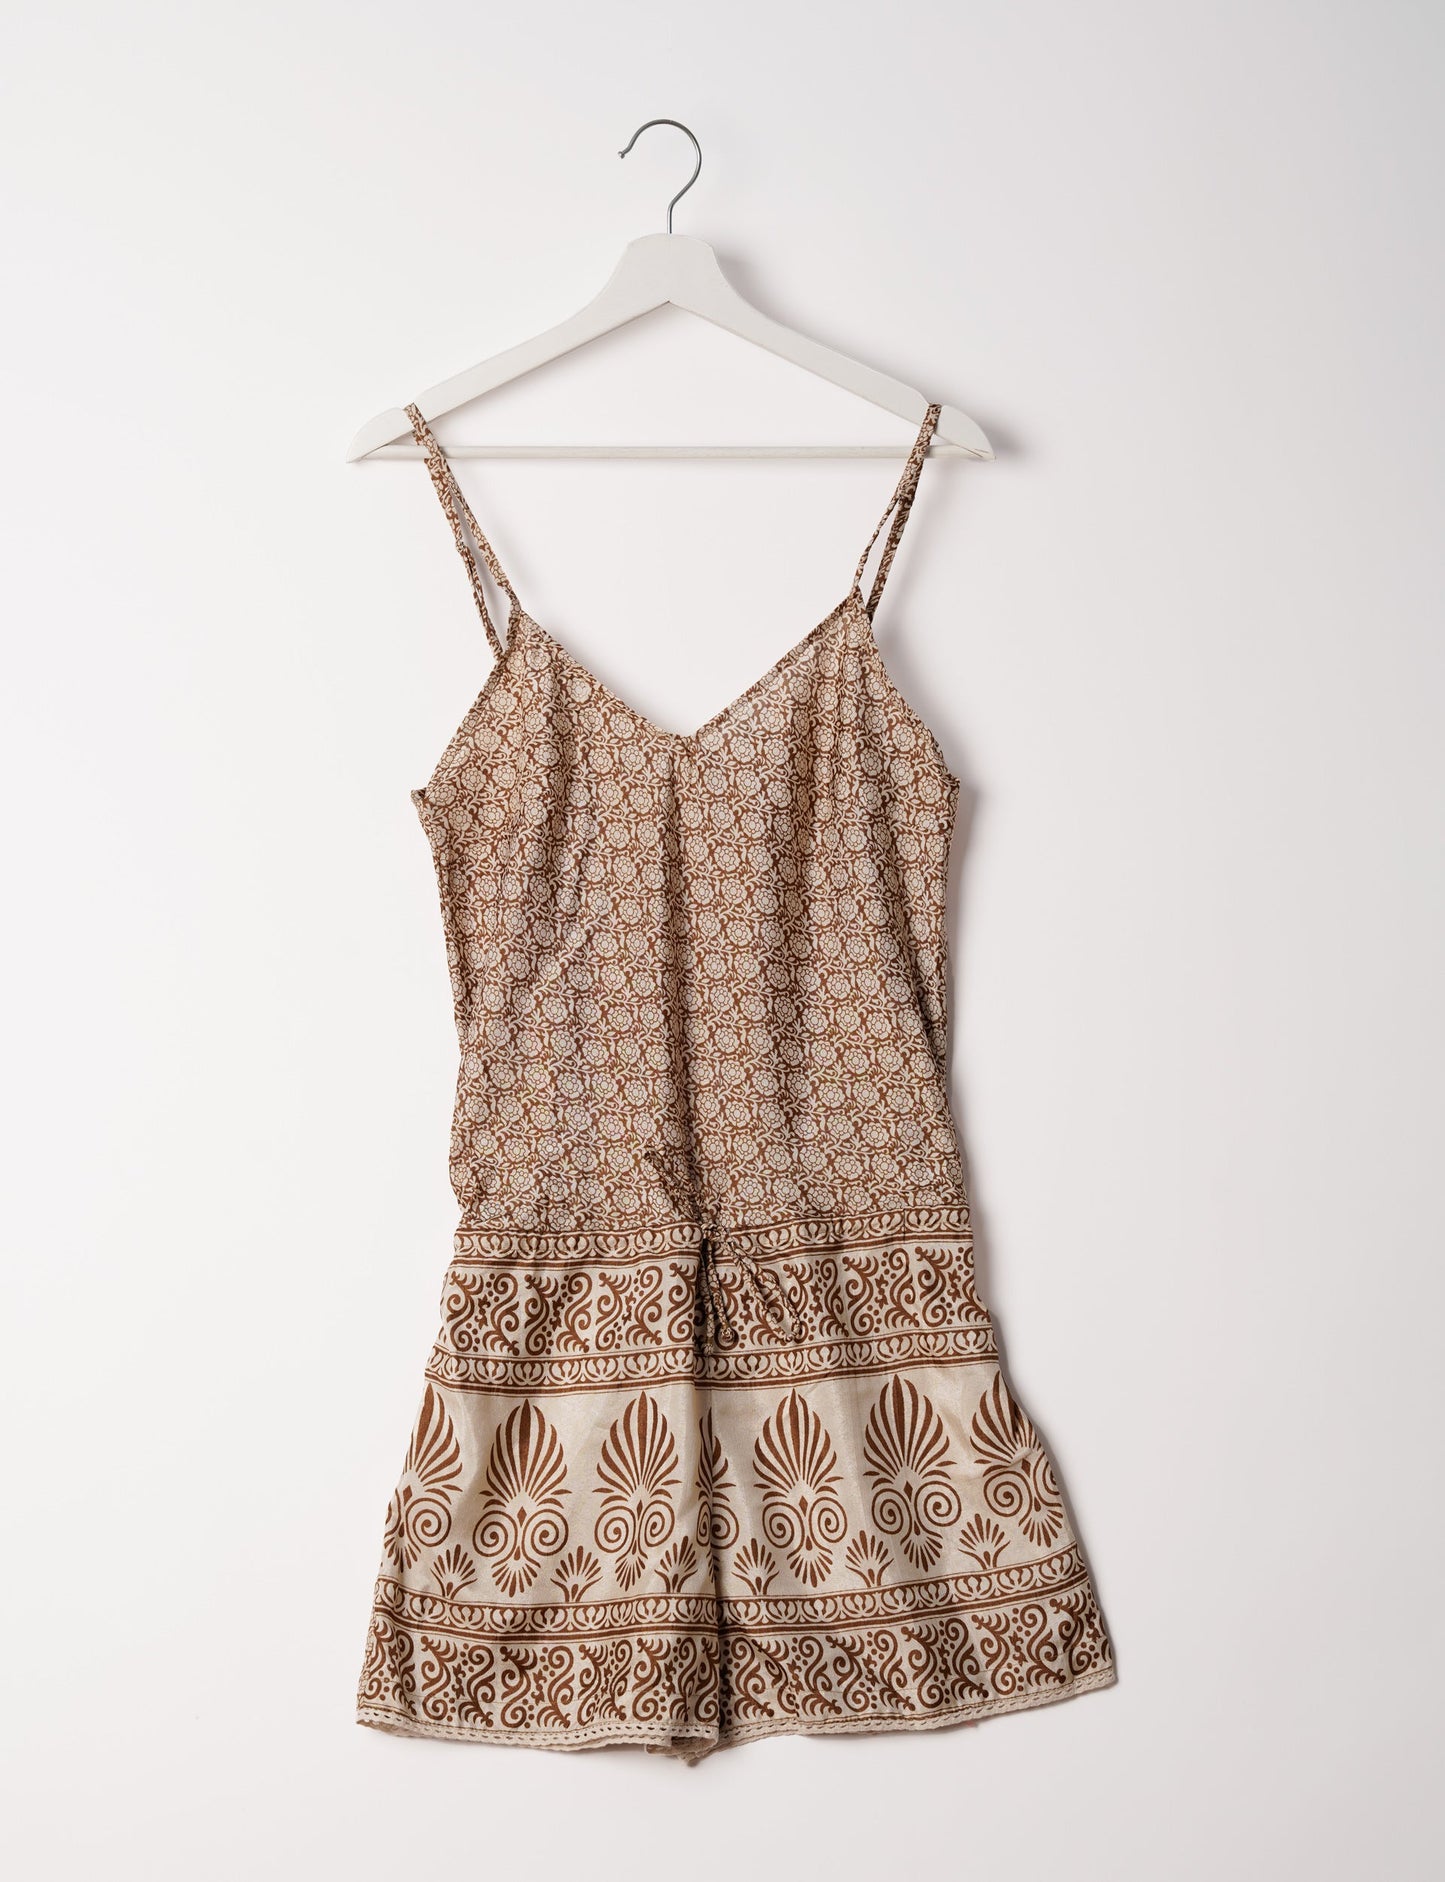 Vibrant playsuit with lace accents, crafted from upcycled saris. Embrace ethical fashion with this unique piece designed for conscious consumers.